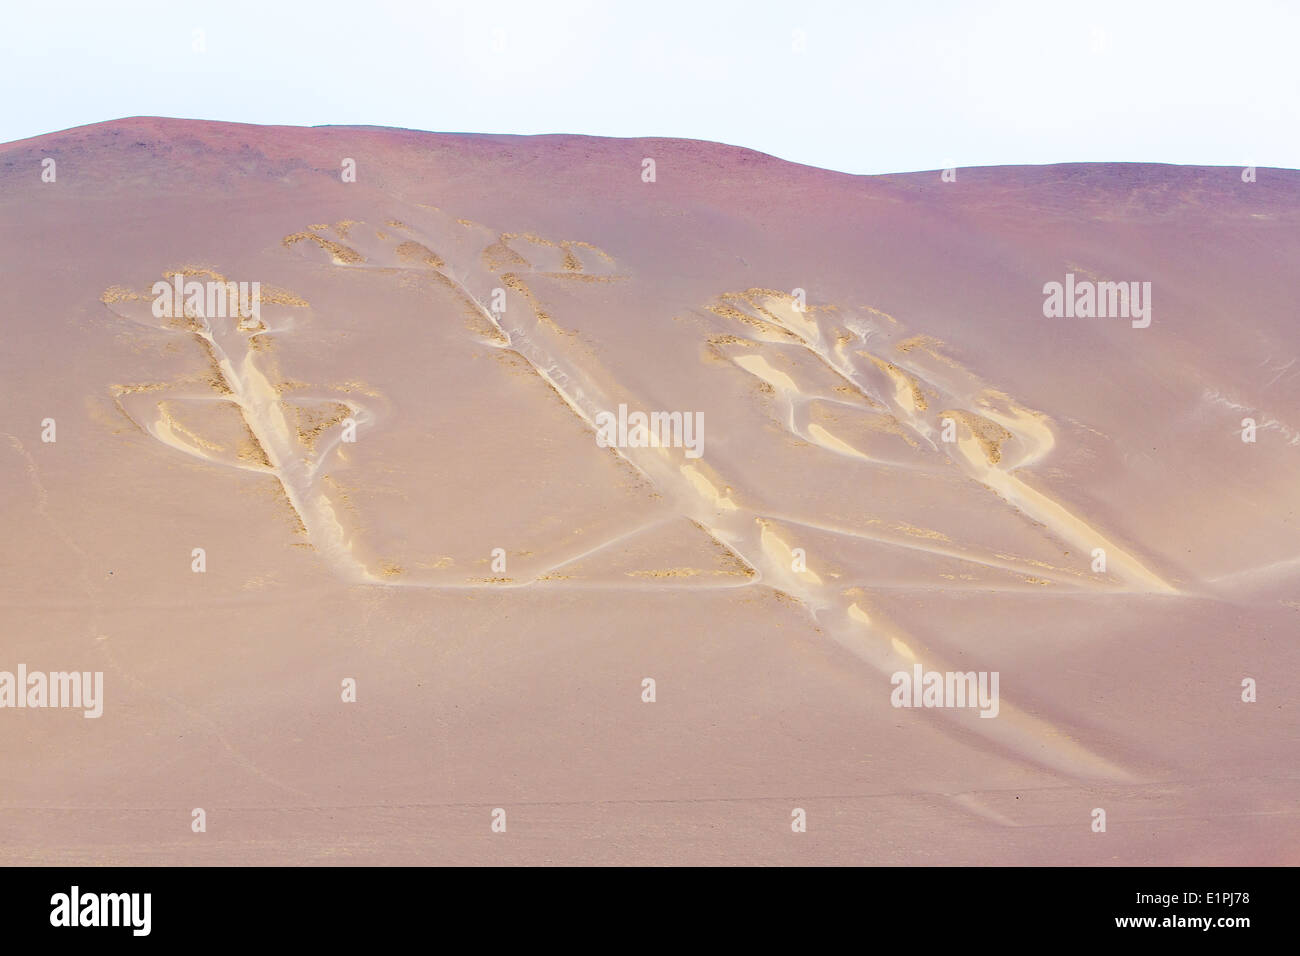 Candelabra, Peru, ancient mysterious drawing in the desert sand, Paracas National Park Stock Photo